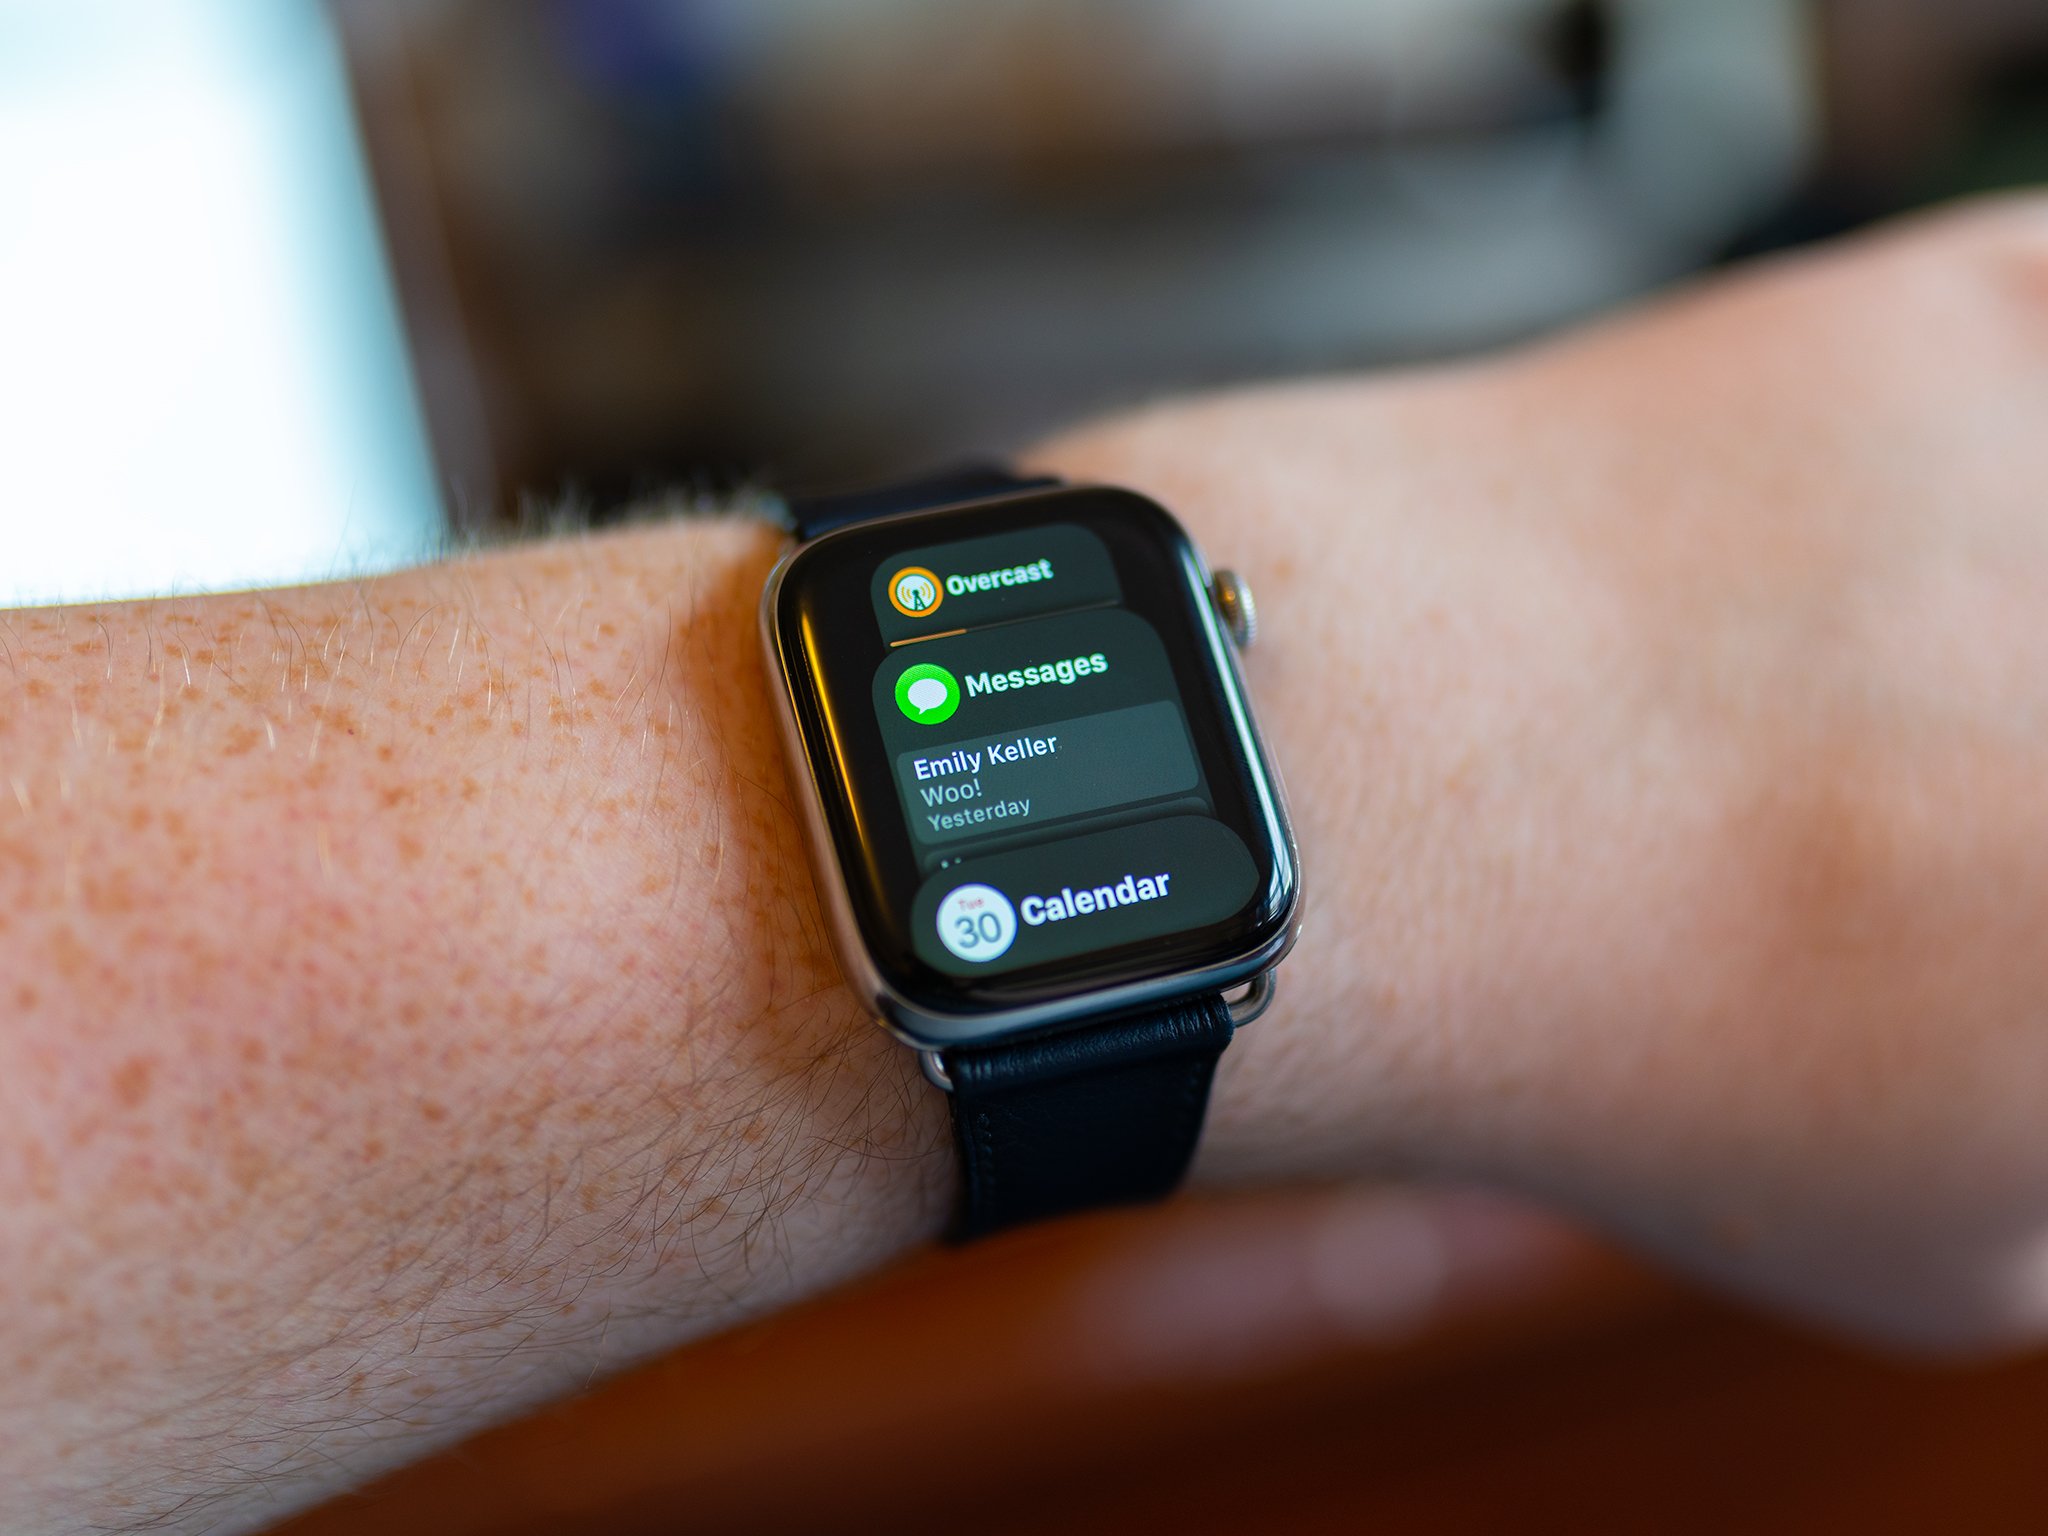 How to download watchOS 6 beta 1 to your Apple Watch